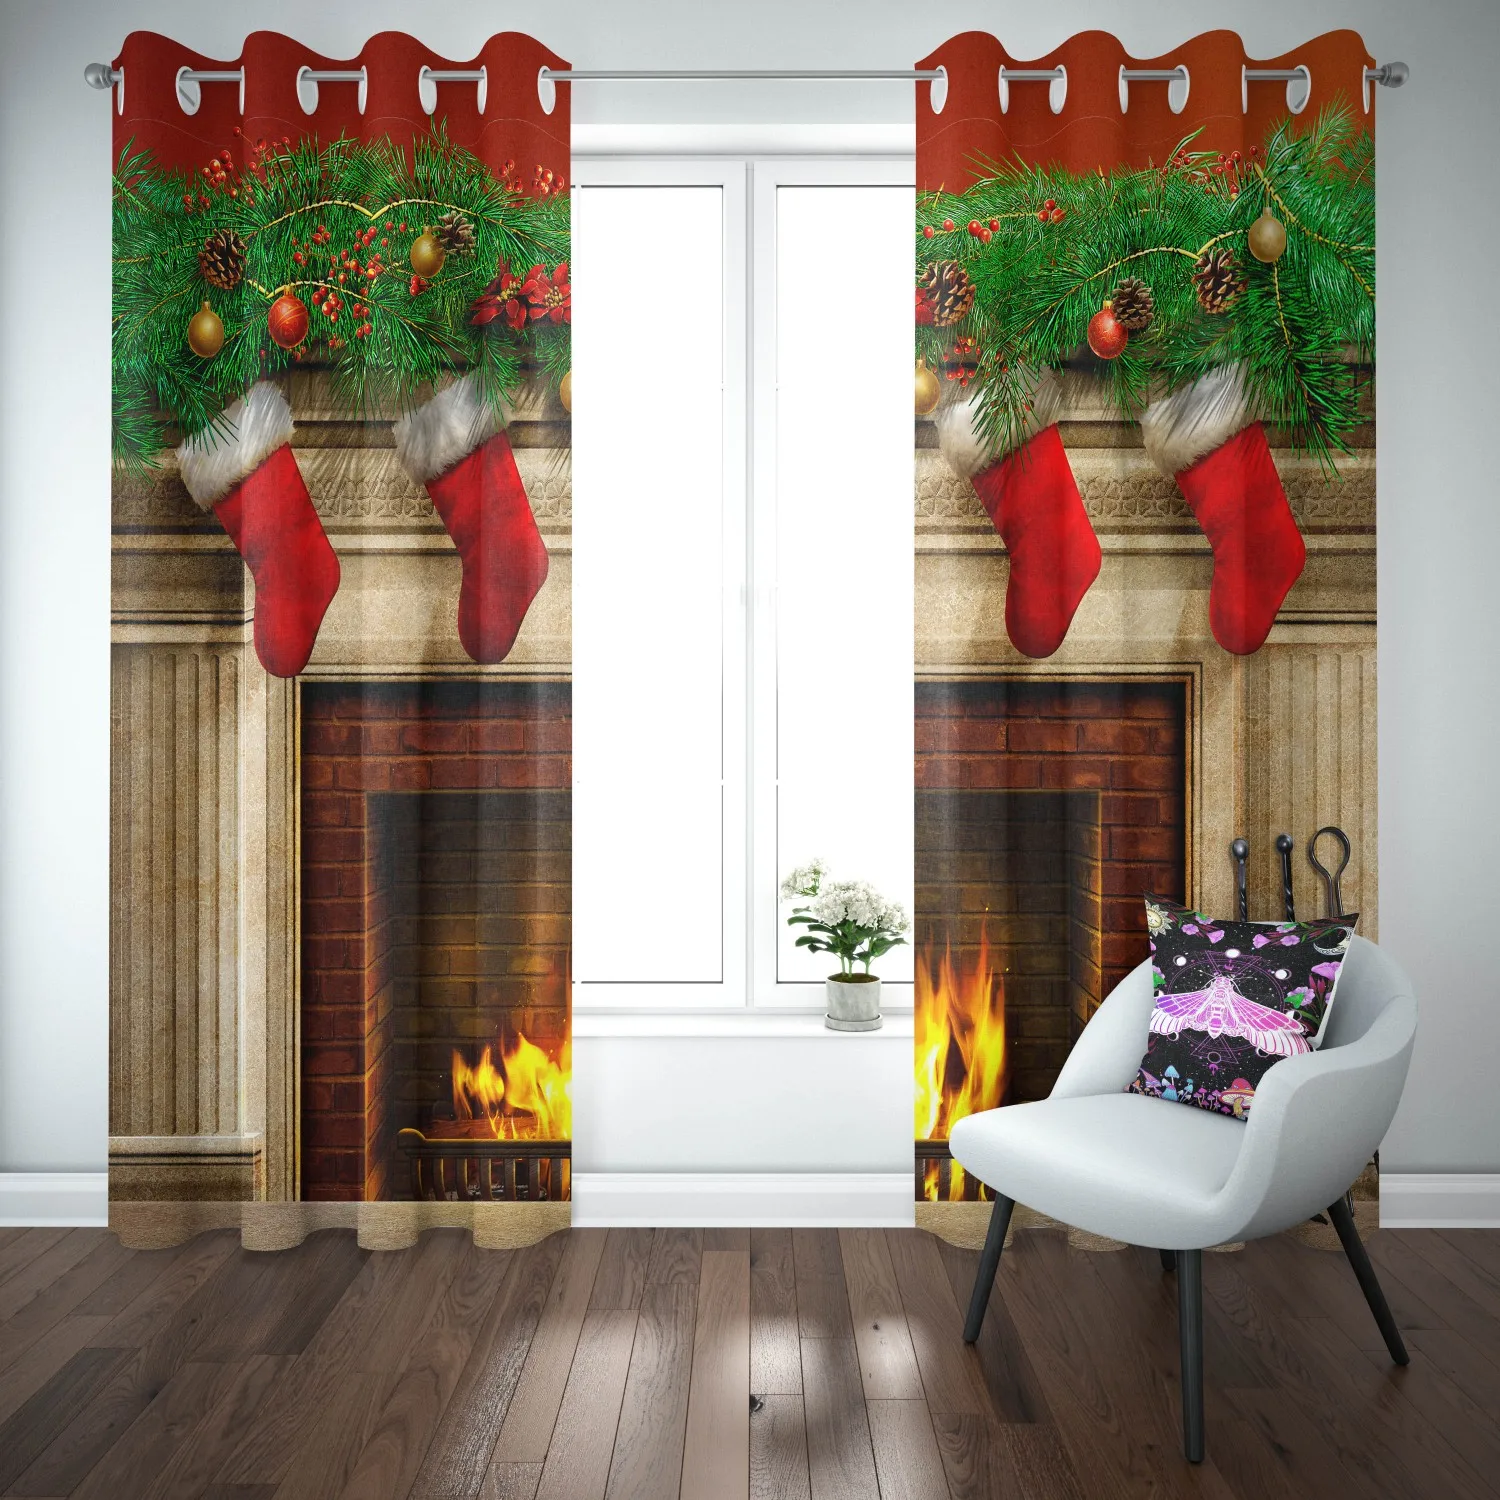 

Snowing Winter Christmas Holiday Curtains For Window Treatment Drapes Window Curtains Living Room Bedroom Kids Room Home Decor